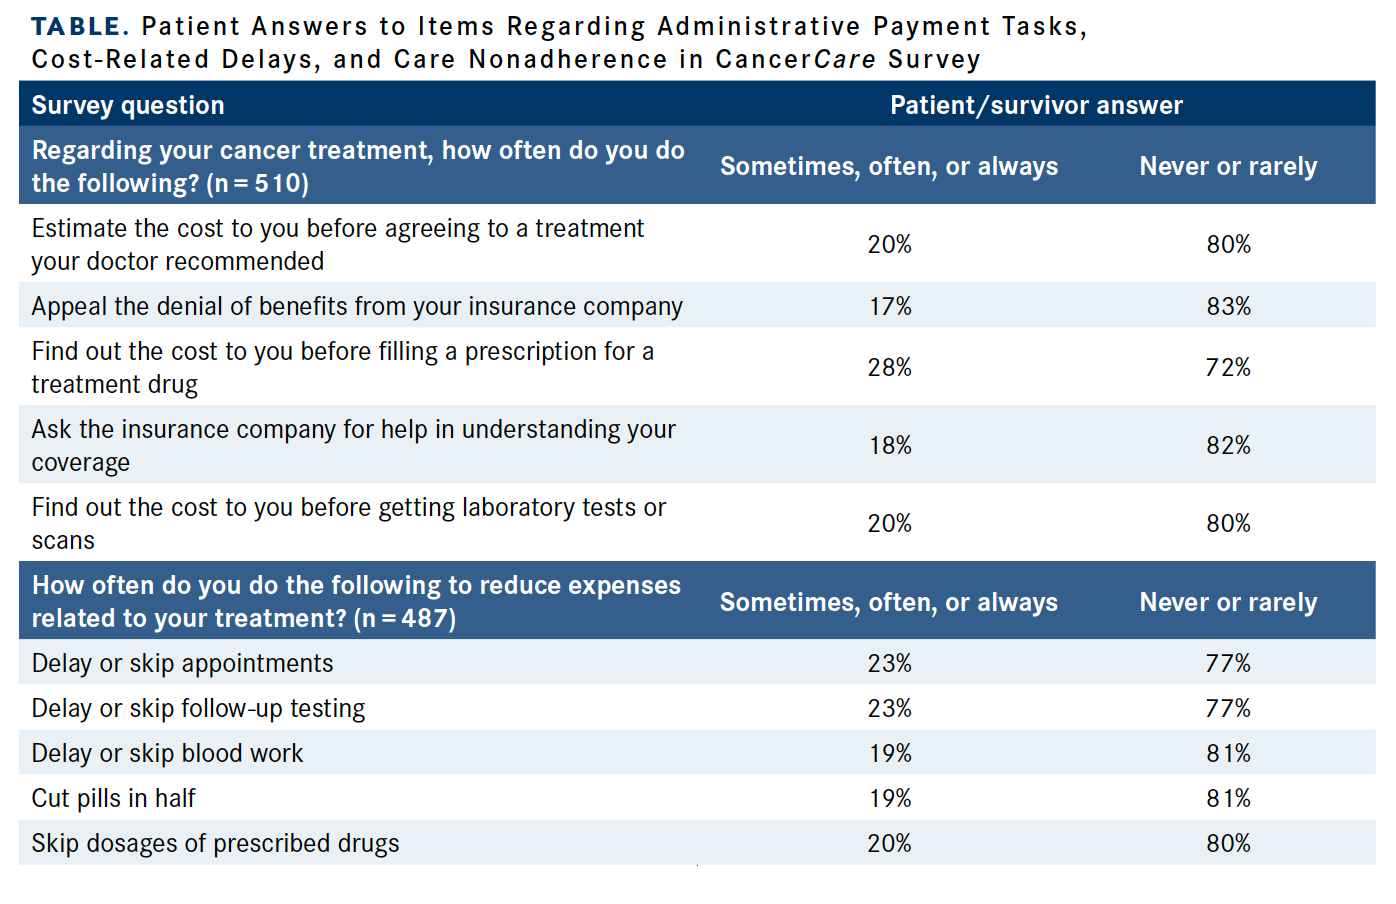 Table. Patient Answers to Items Regarding Administrative Payment Tasks Cost-Related Delays, and Care Nonadherence in CancerCare Survey